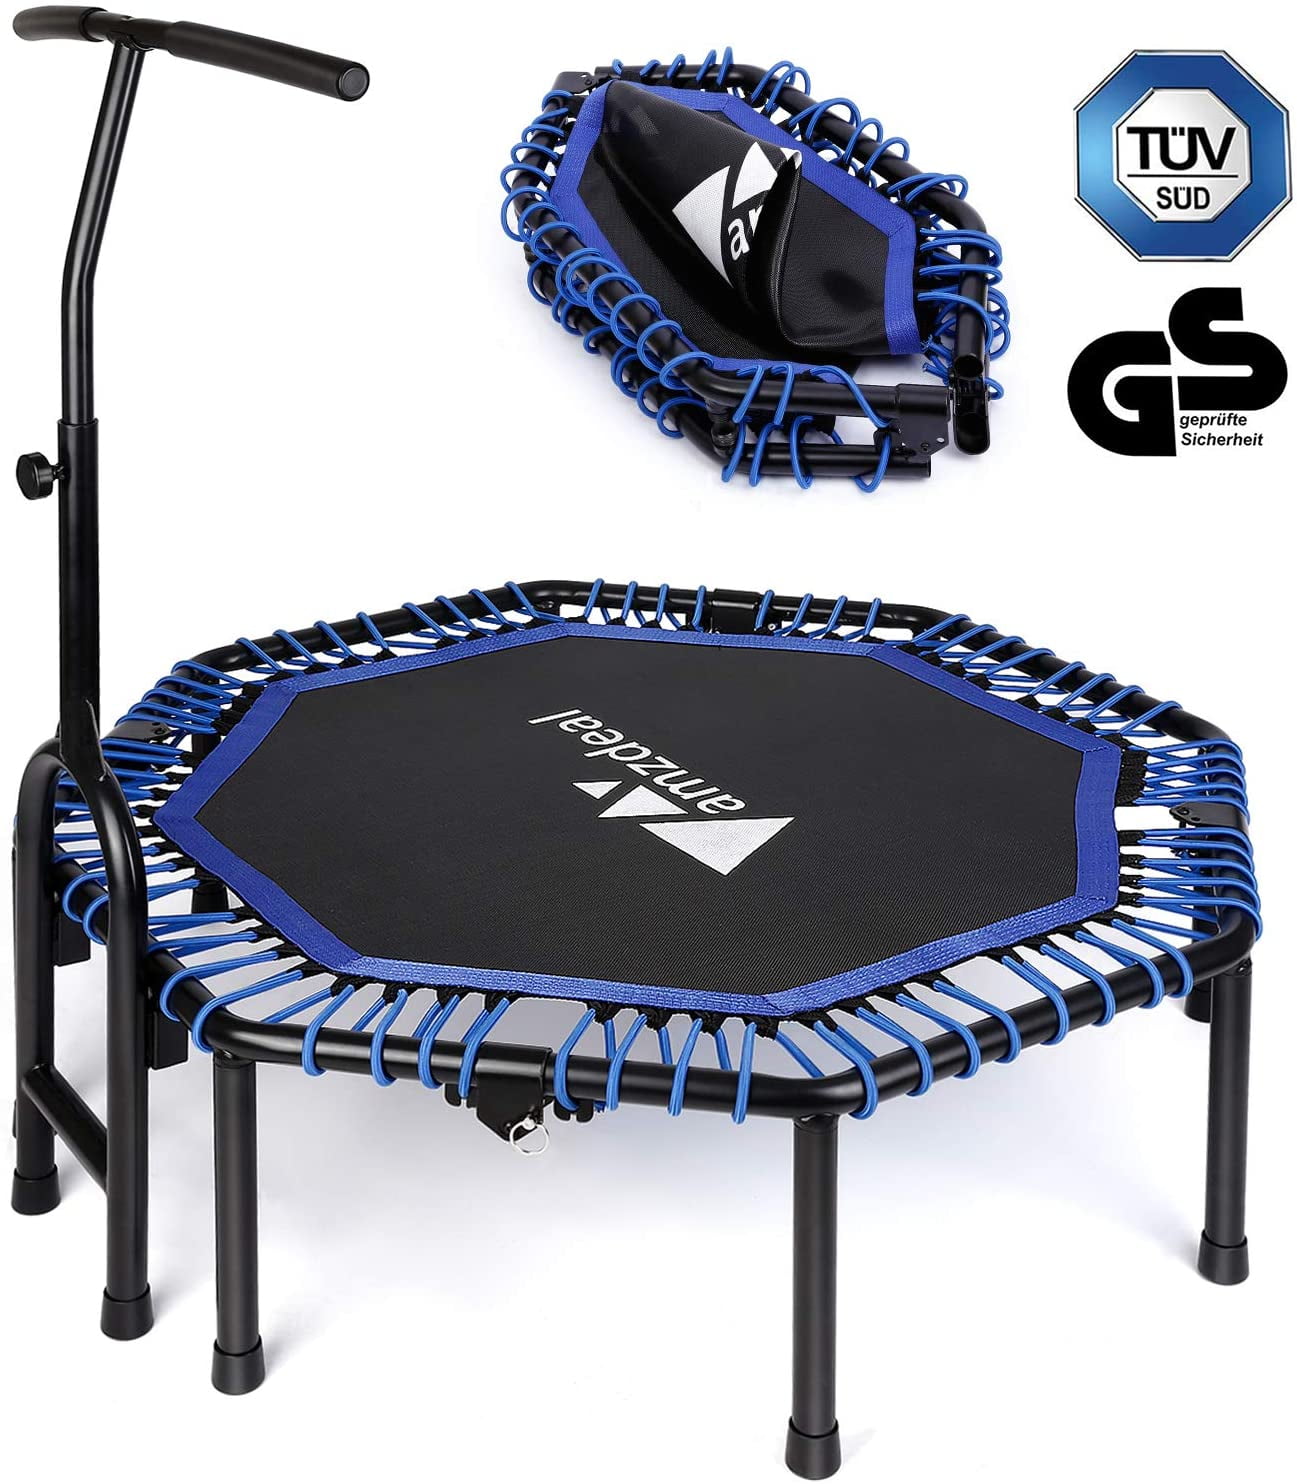 Amzdeal 47 inch Foldable Fitness Trampolines, Mini Rebound Recreational ...